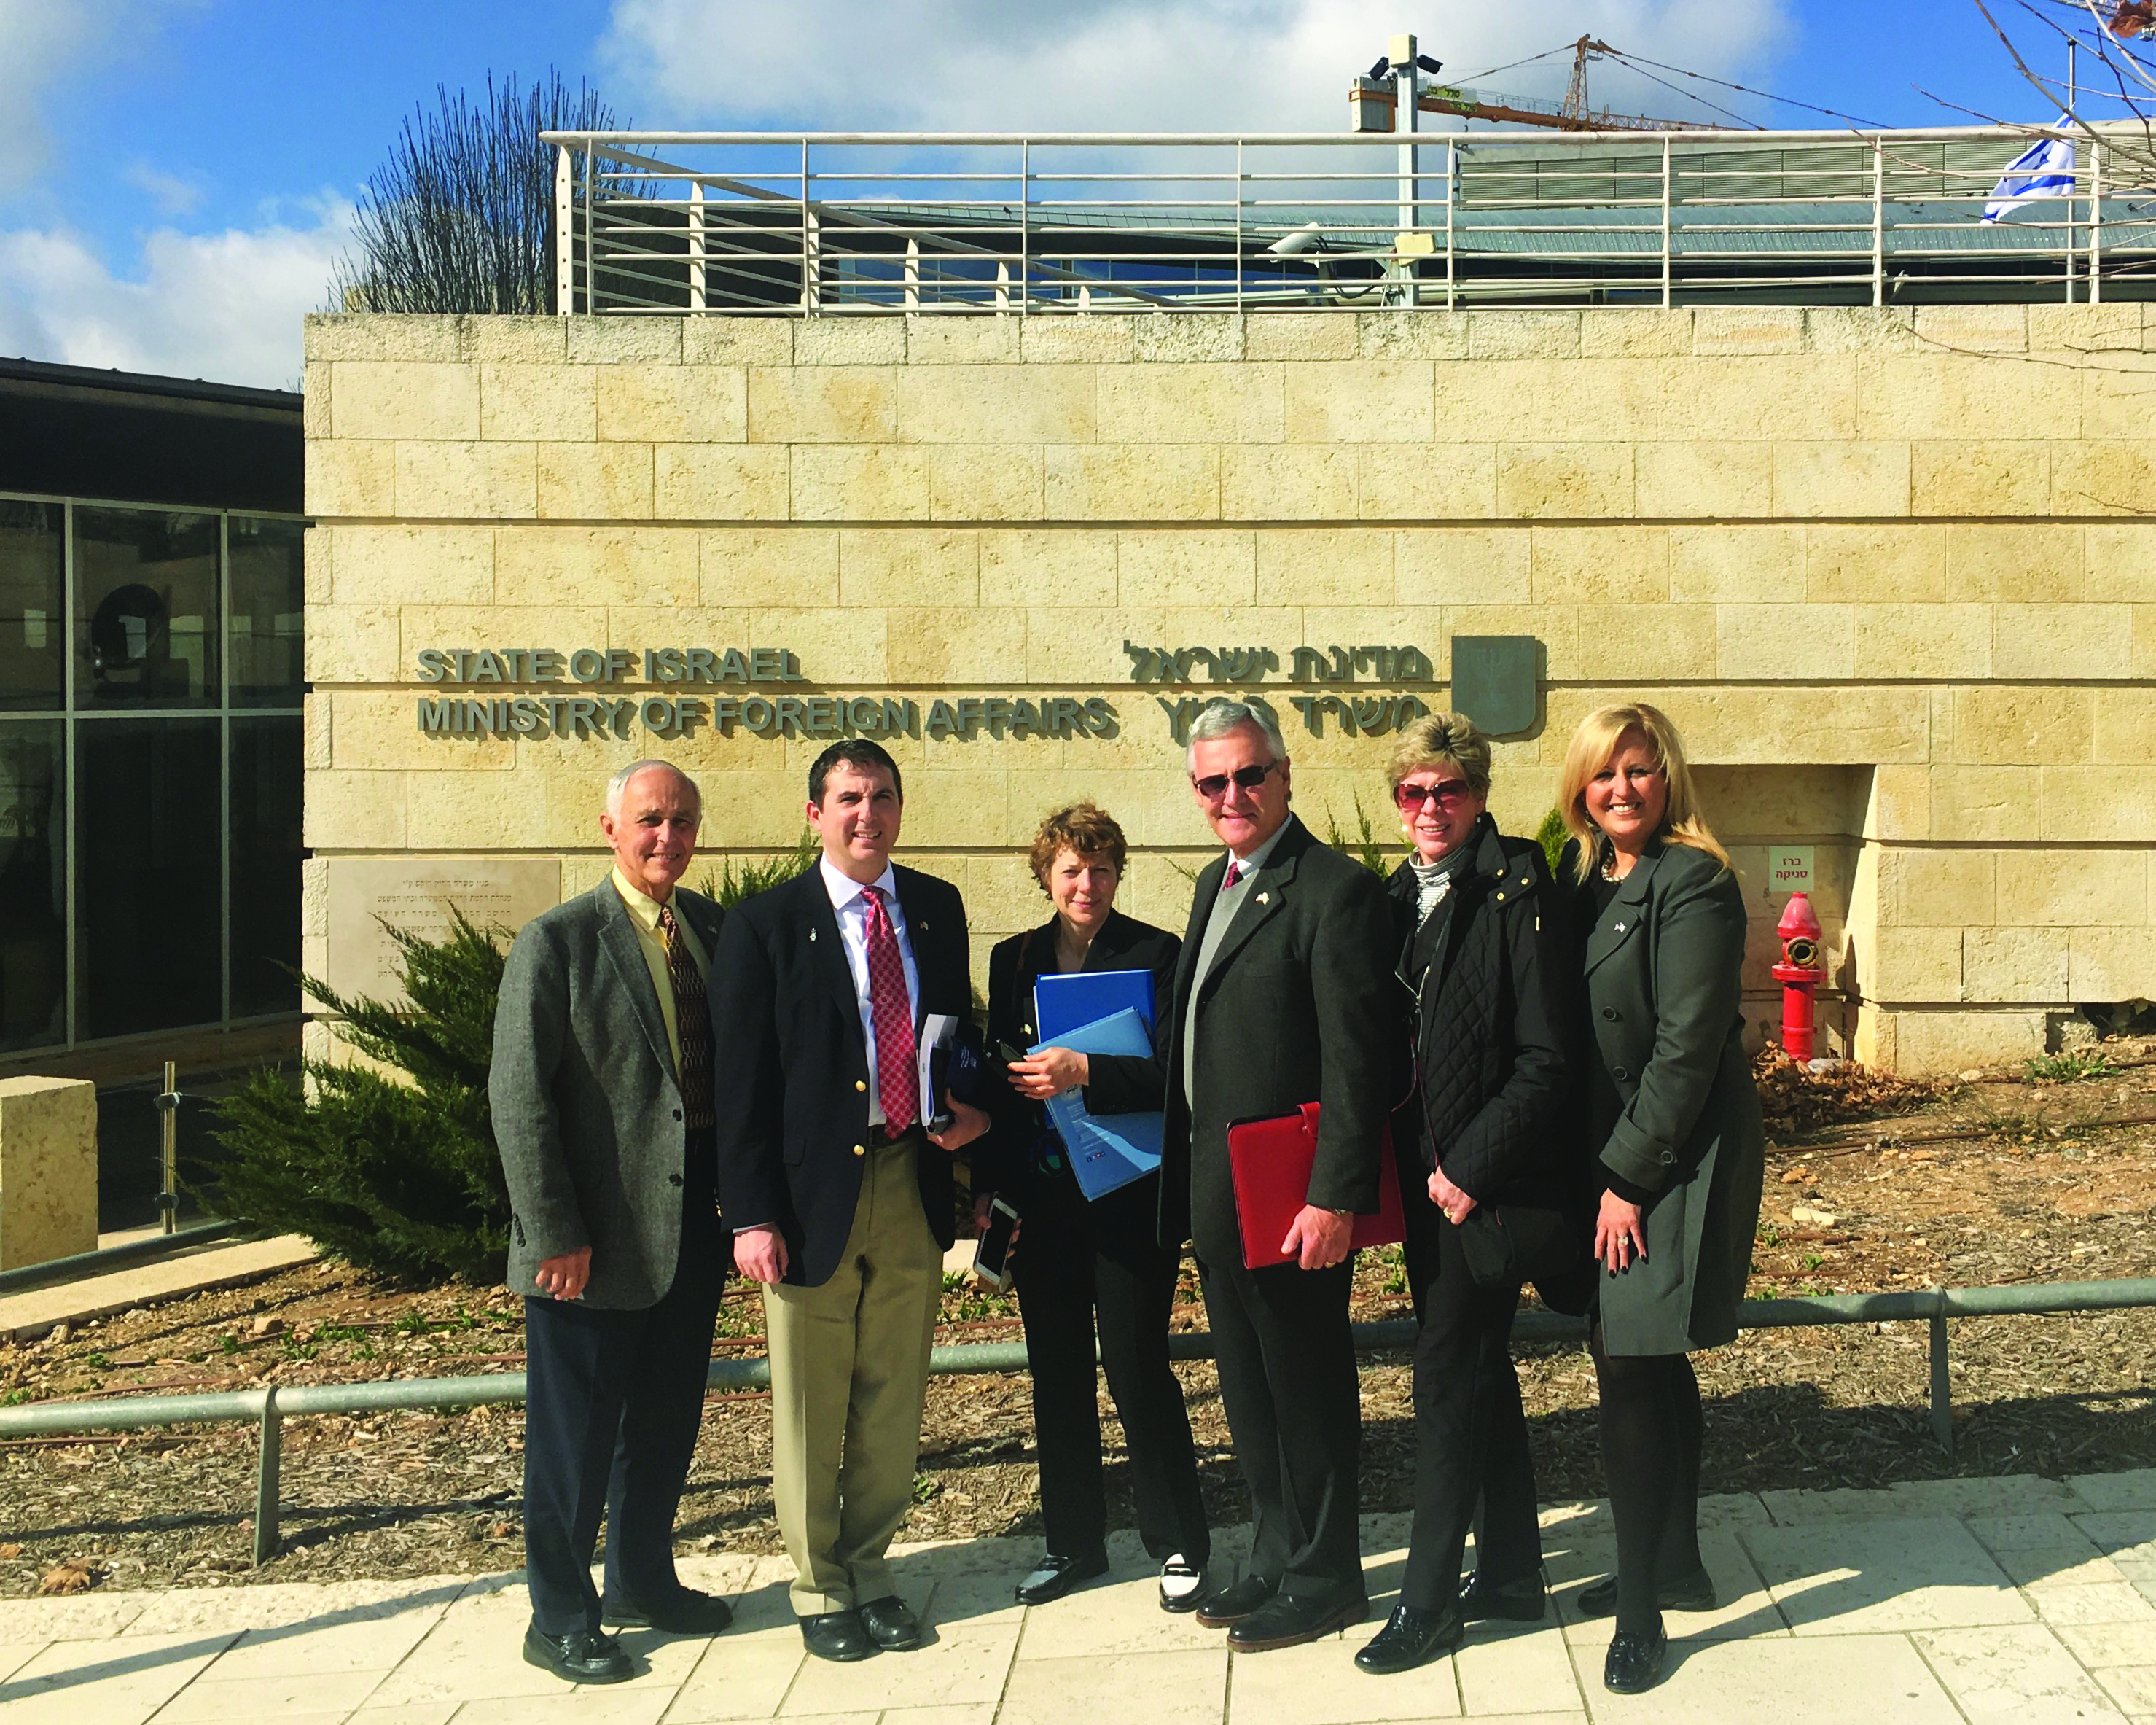 Exploring educational and business opportunities in Israel